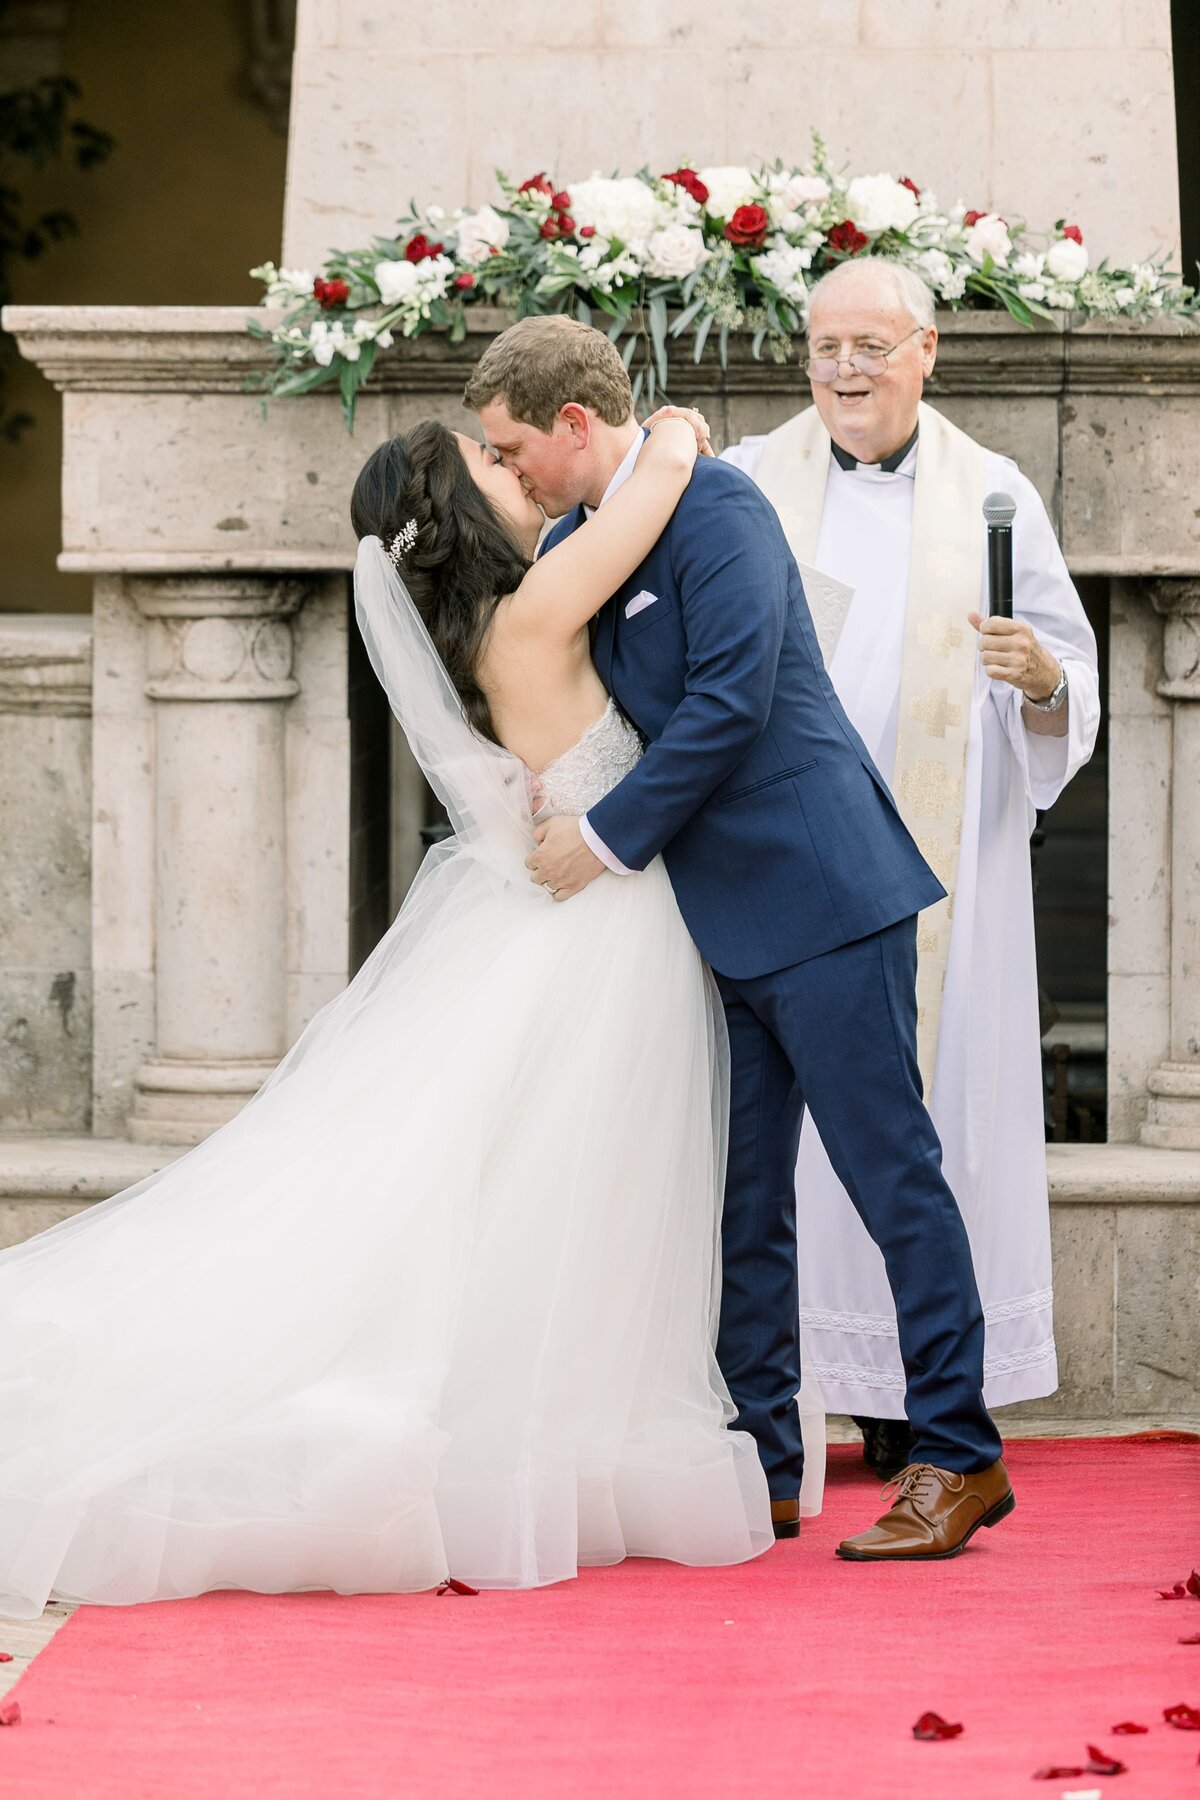 bride-and-groom0frist-kiss-as-newlyweds